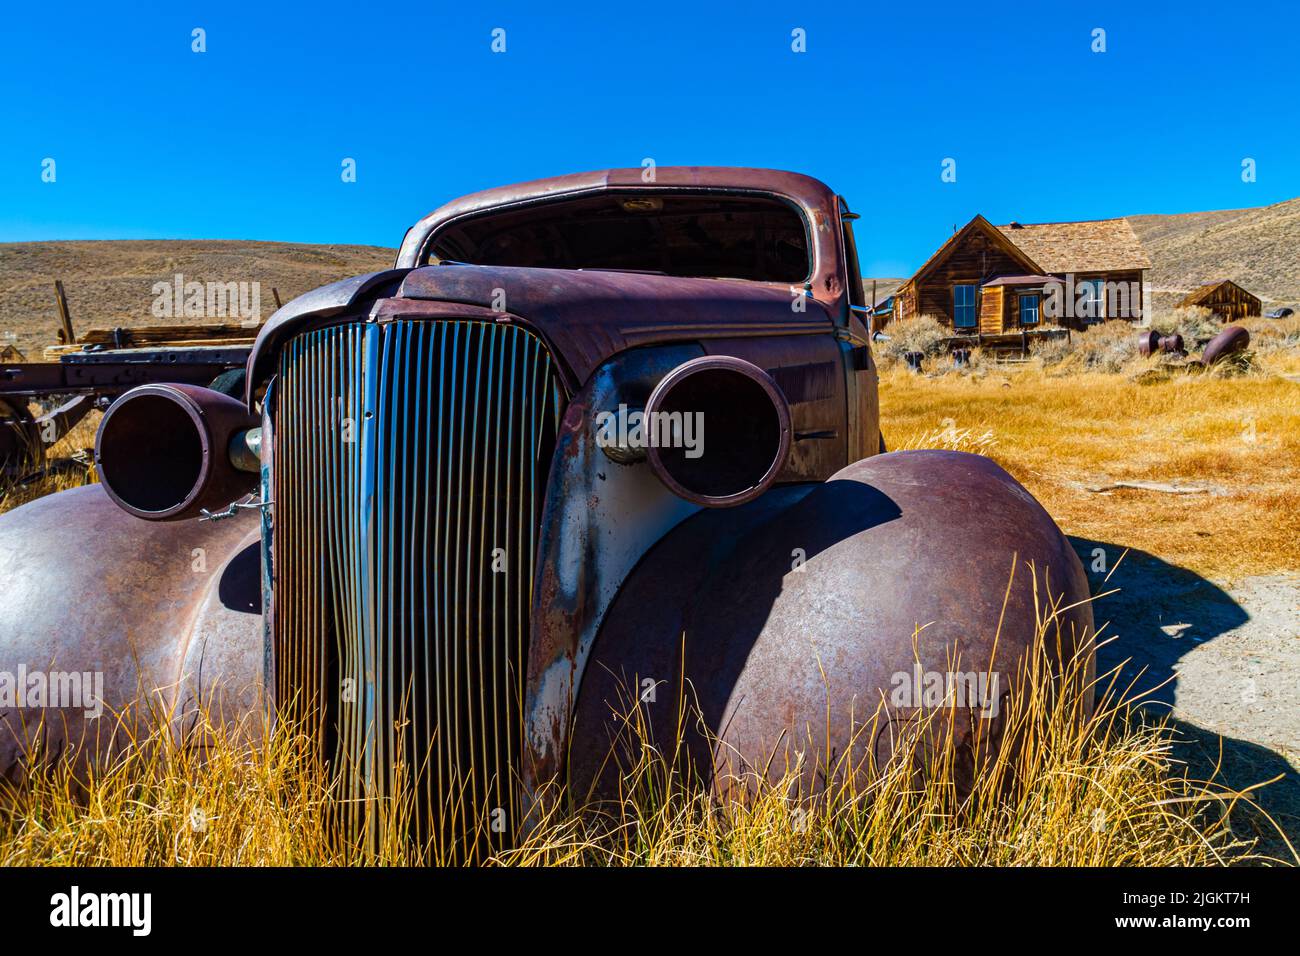 Remains of a 1937 Chevy Coupe, Bodie State Historical Park, California, USA Stock Photo